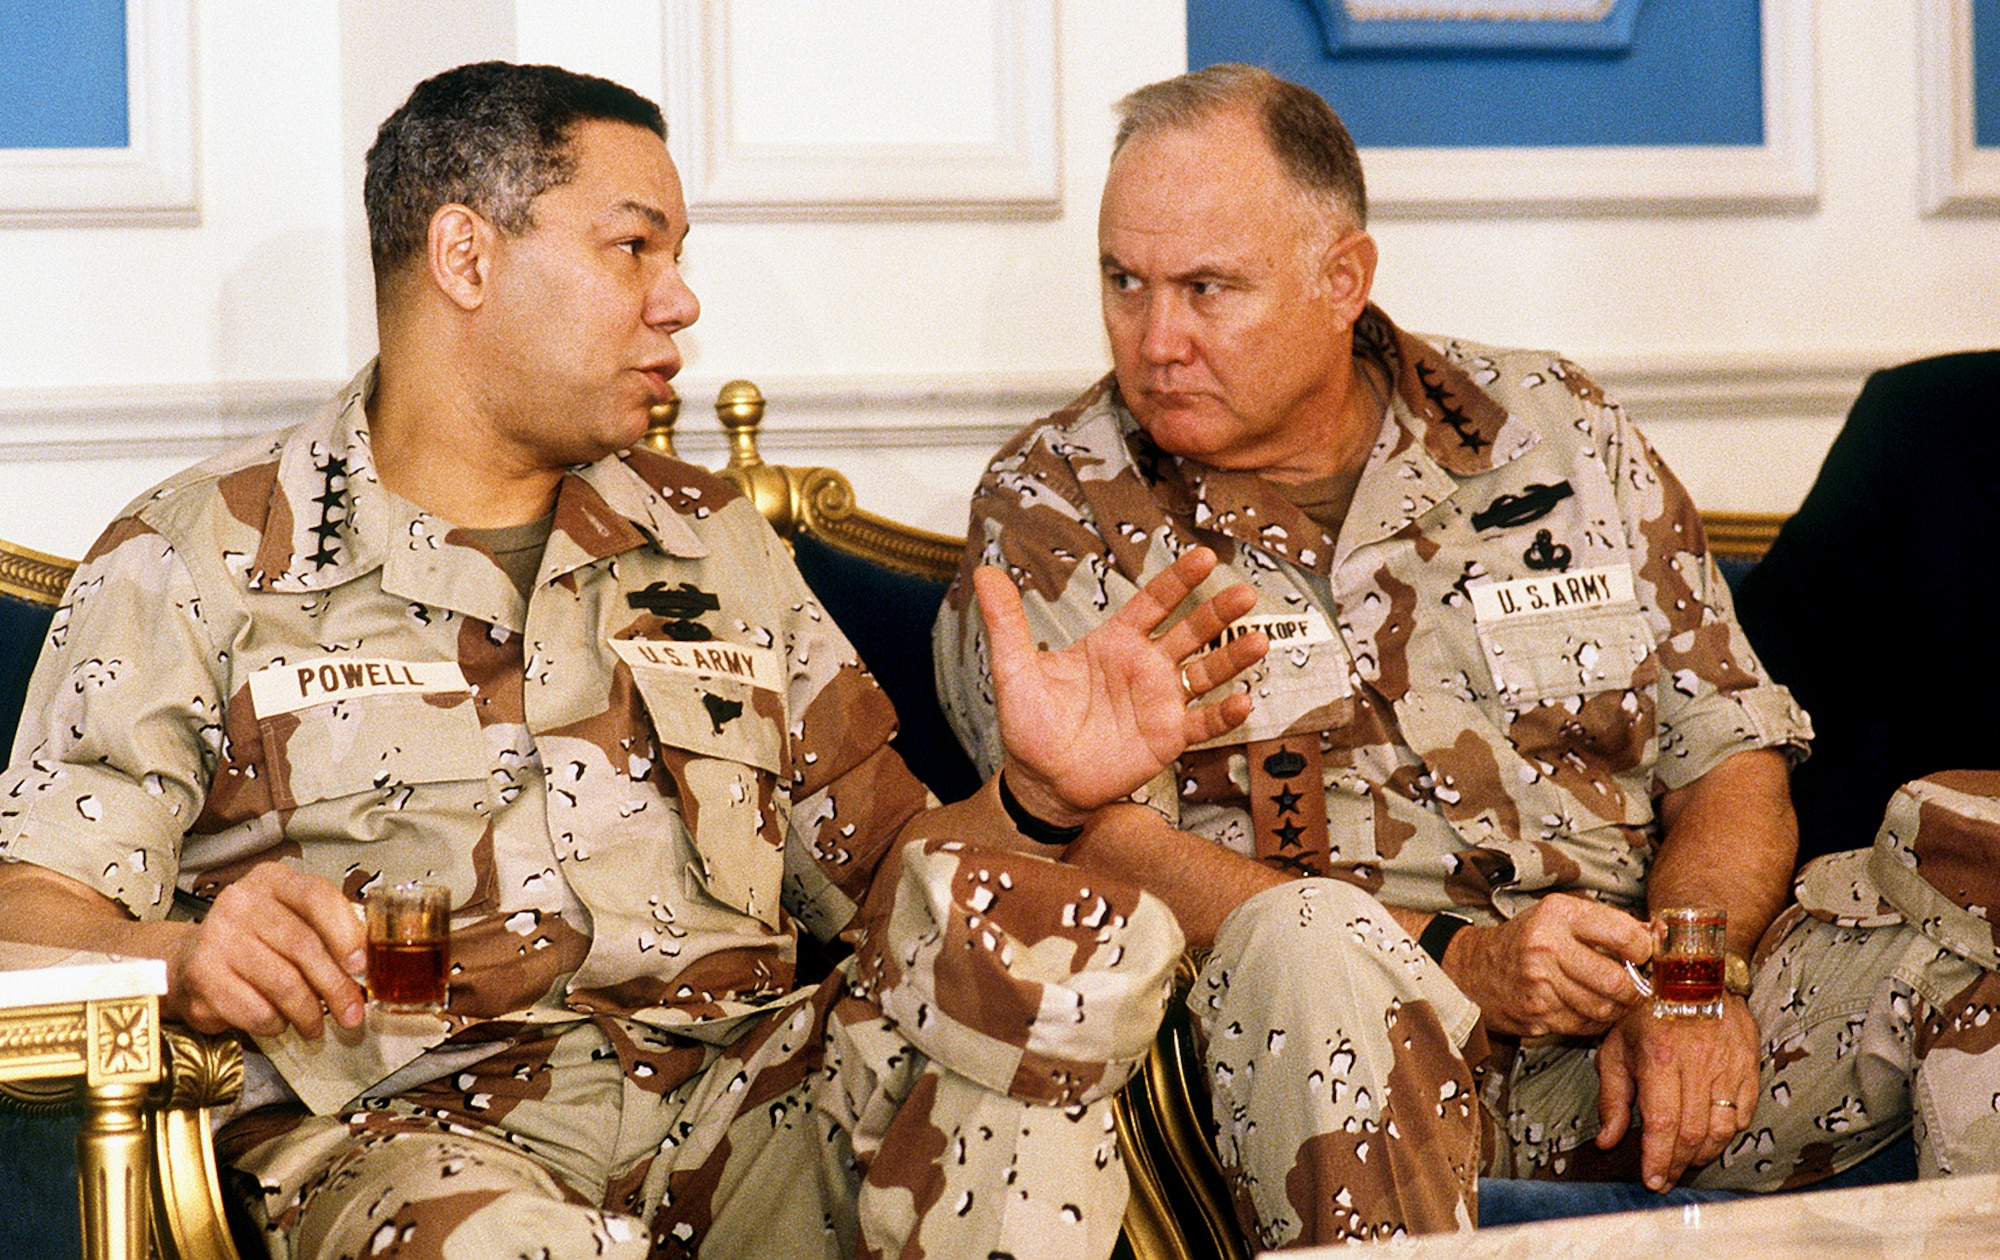 Army Gen. Norman H. Schwarzkopf consults with then-Chairman of the Joint Chiefs of Staff Gen. Colin Powell in a meeting regarding the Allied military coalition in Operation Desert Shield. Schwarzkopf, the commander in chief of U.S. Central Command during Desert Shield and Operation Desert Storm, died Dec. 27, 2012, at the age of 78. (U.S. Air Force photo/Tech. Sgt. H. H. Deffner)